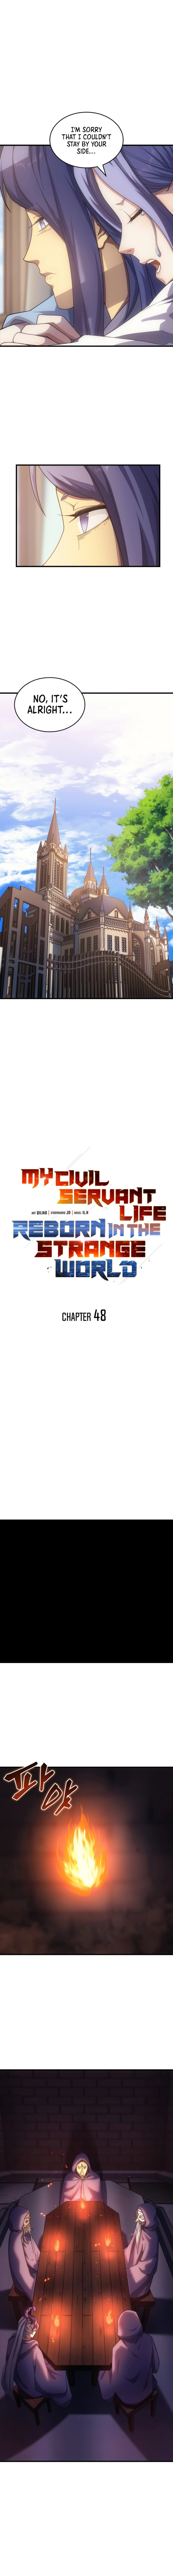 My Civil Servant Life Reborn in the Strange World - Chapter 48 Page 2